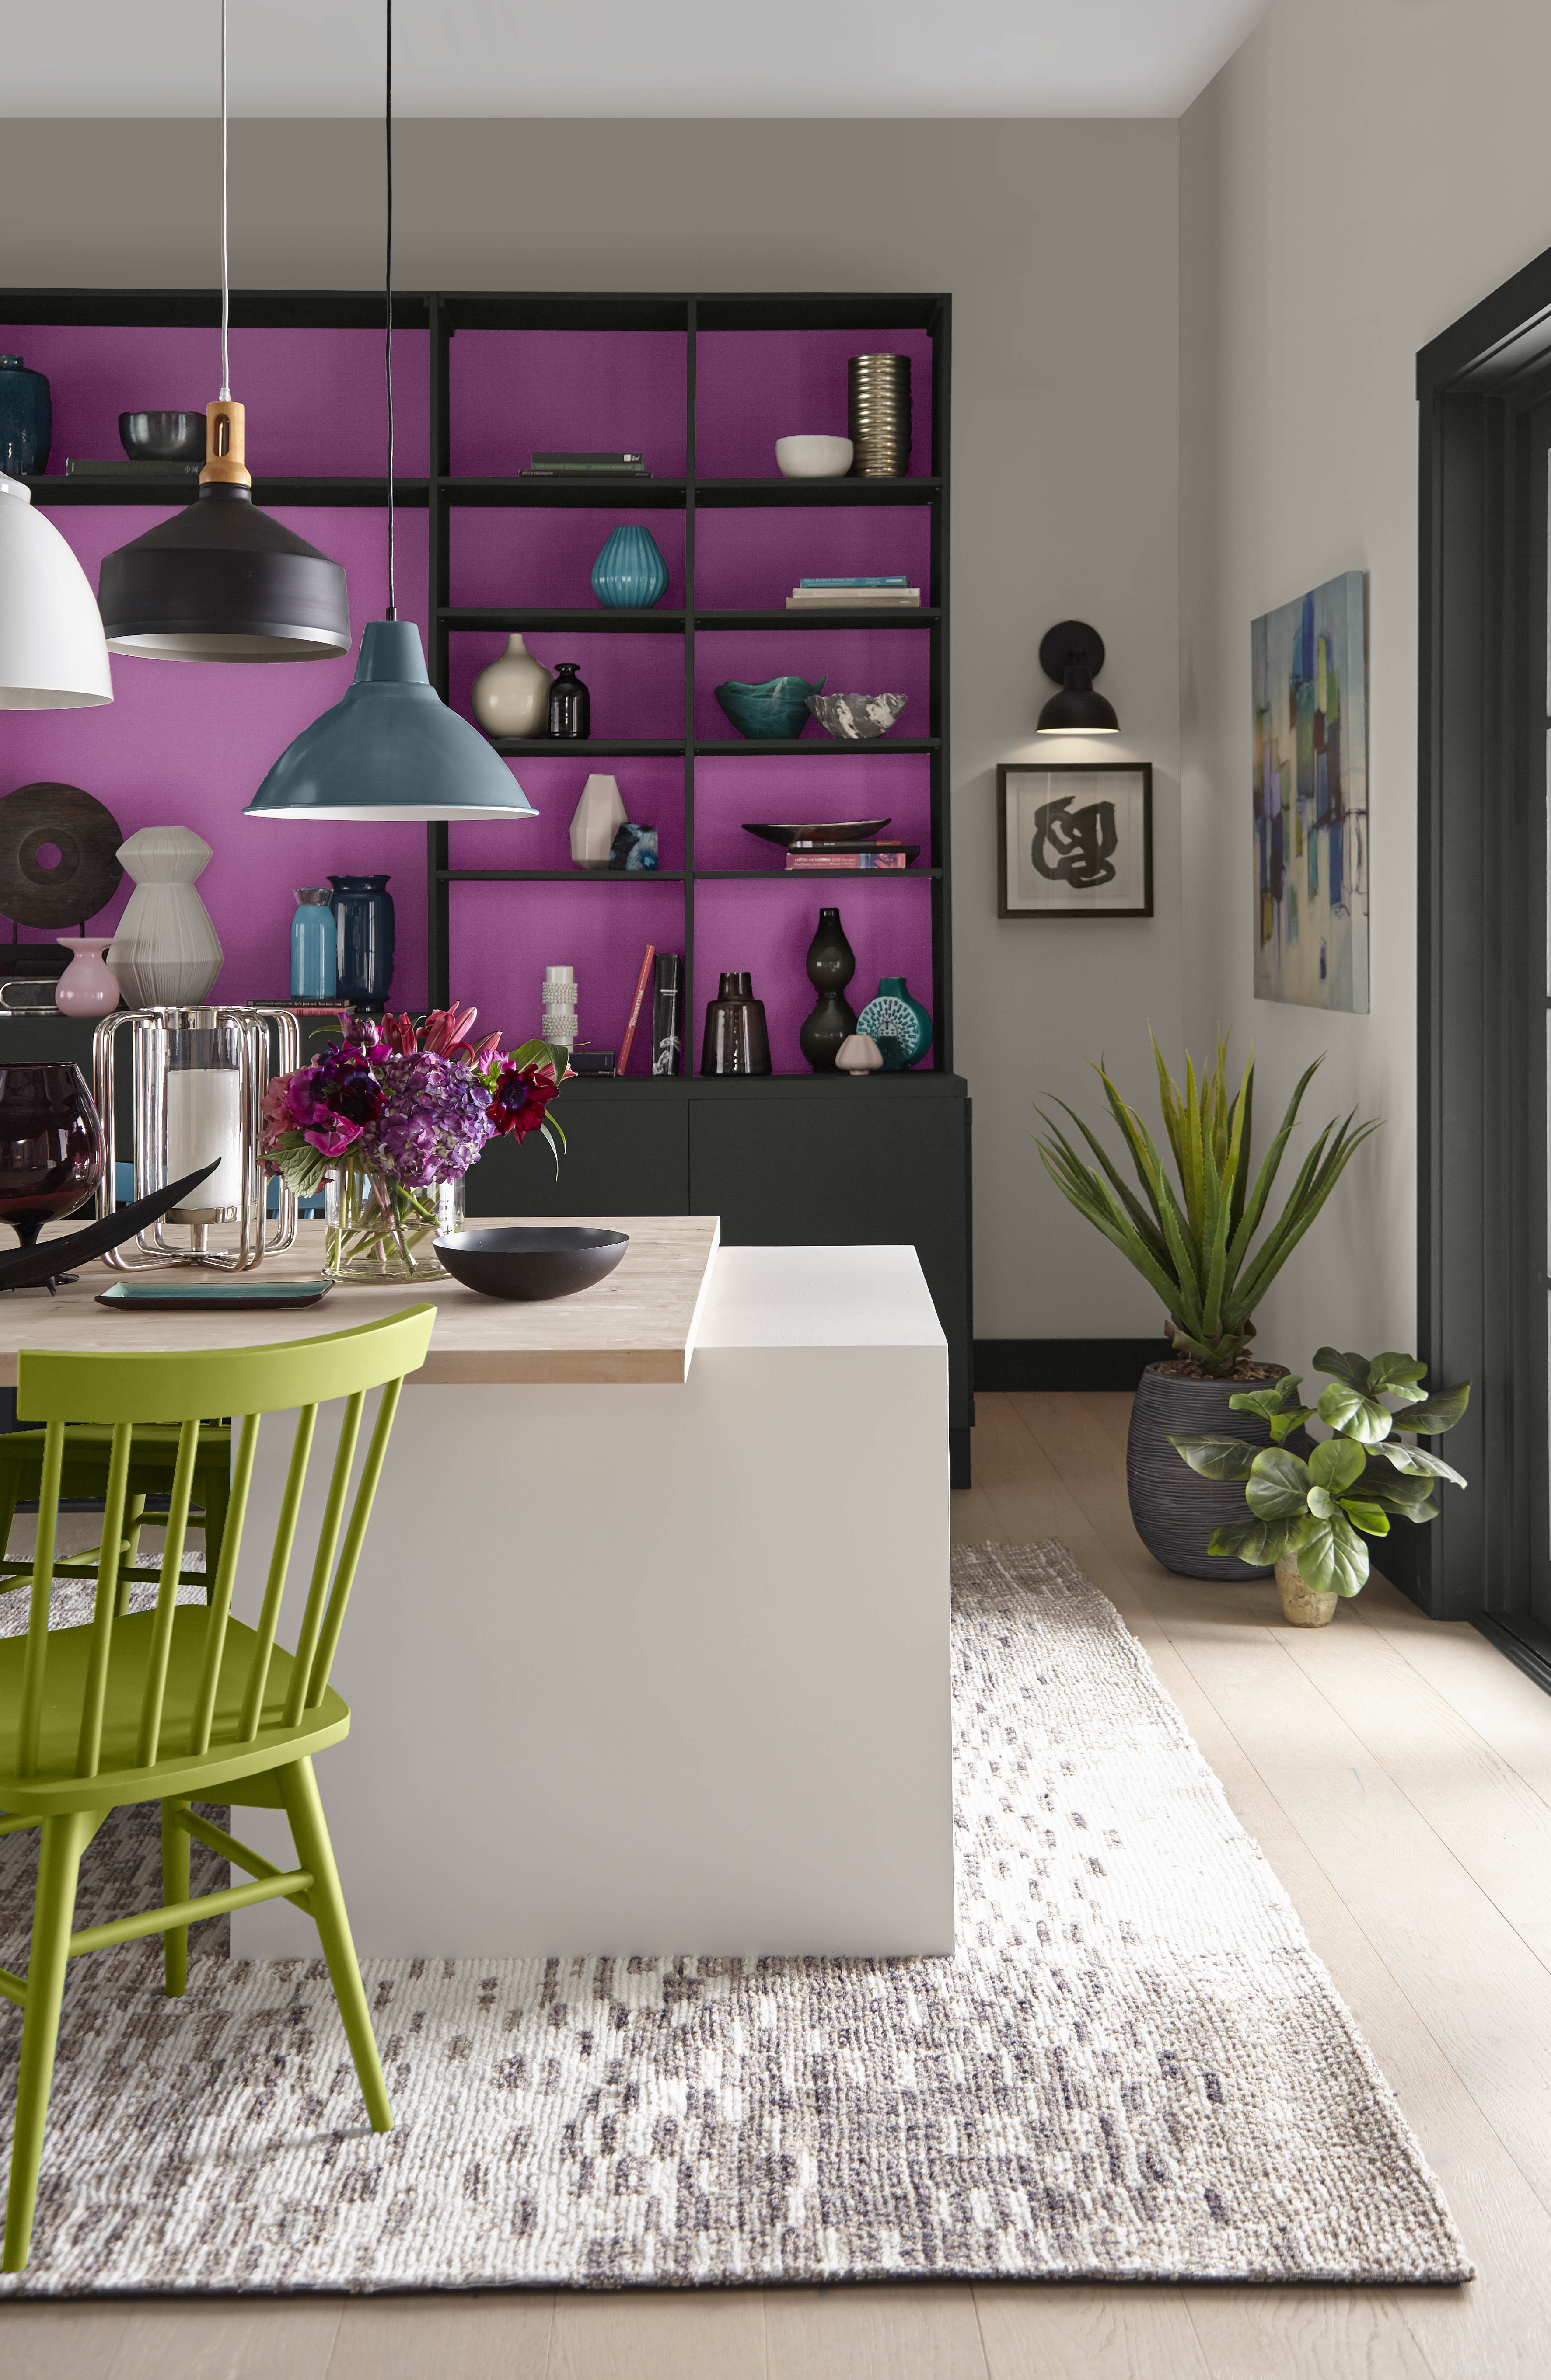 A closeup of shelves and chairs in magenta and light green accents